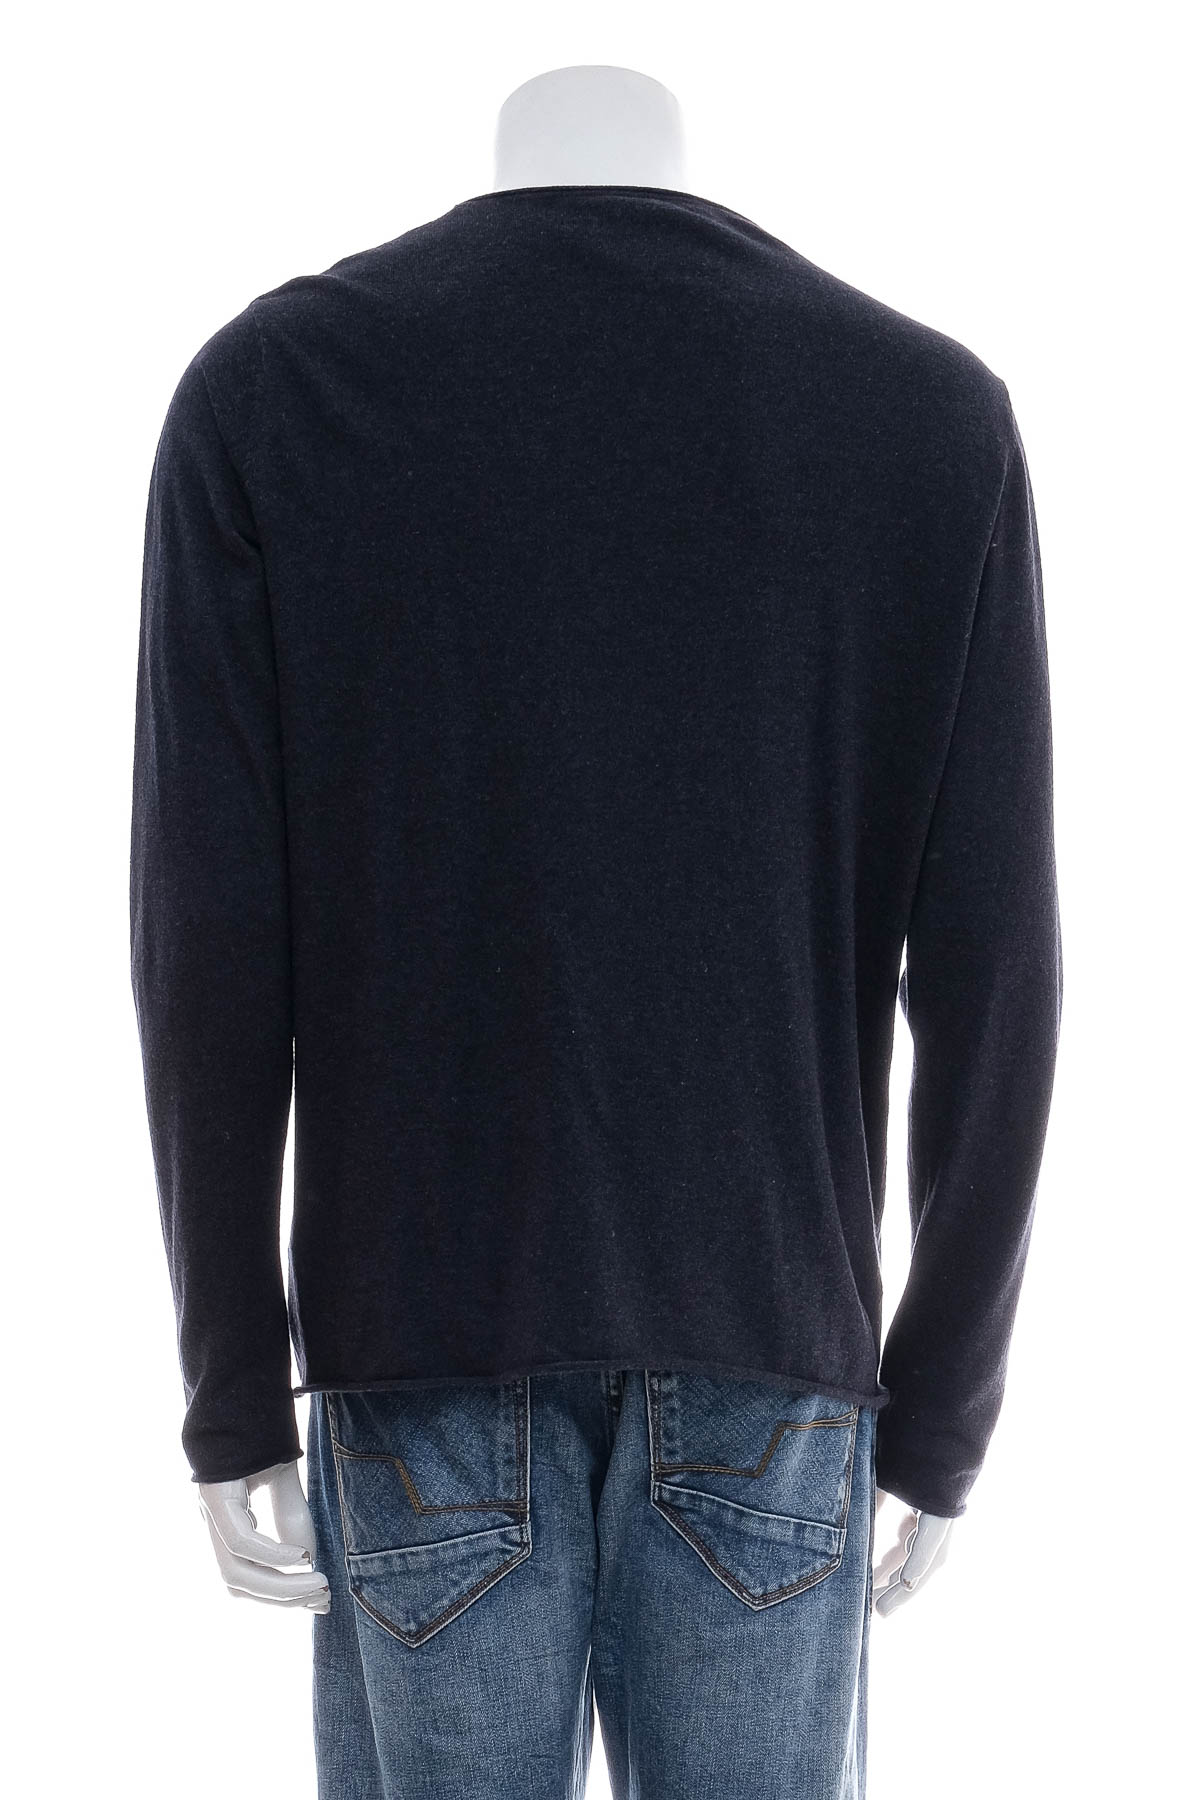 Men's sweater - SELECTED HOMME - 1